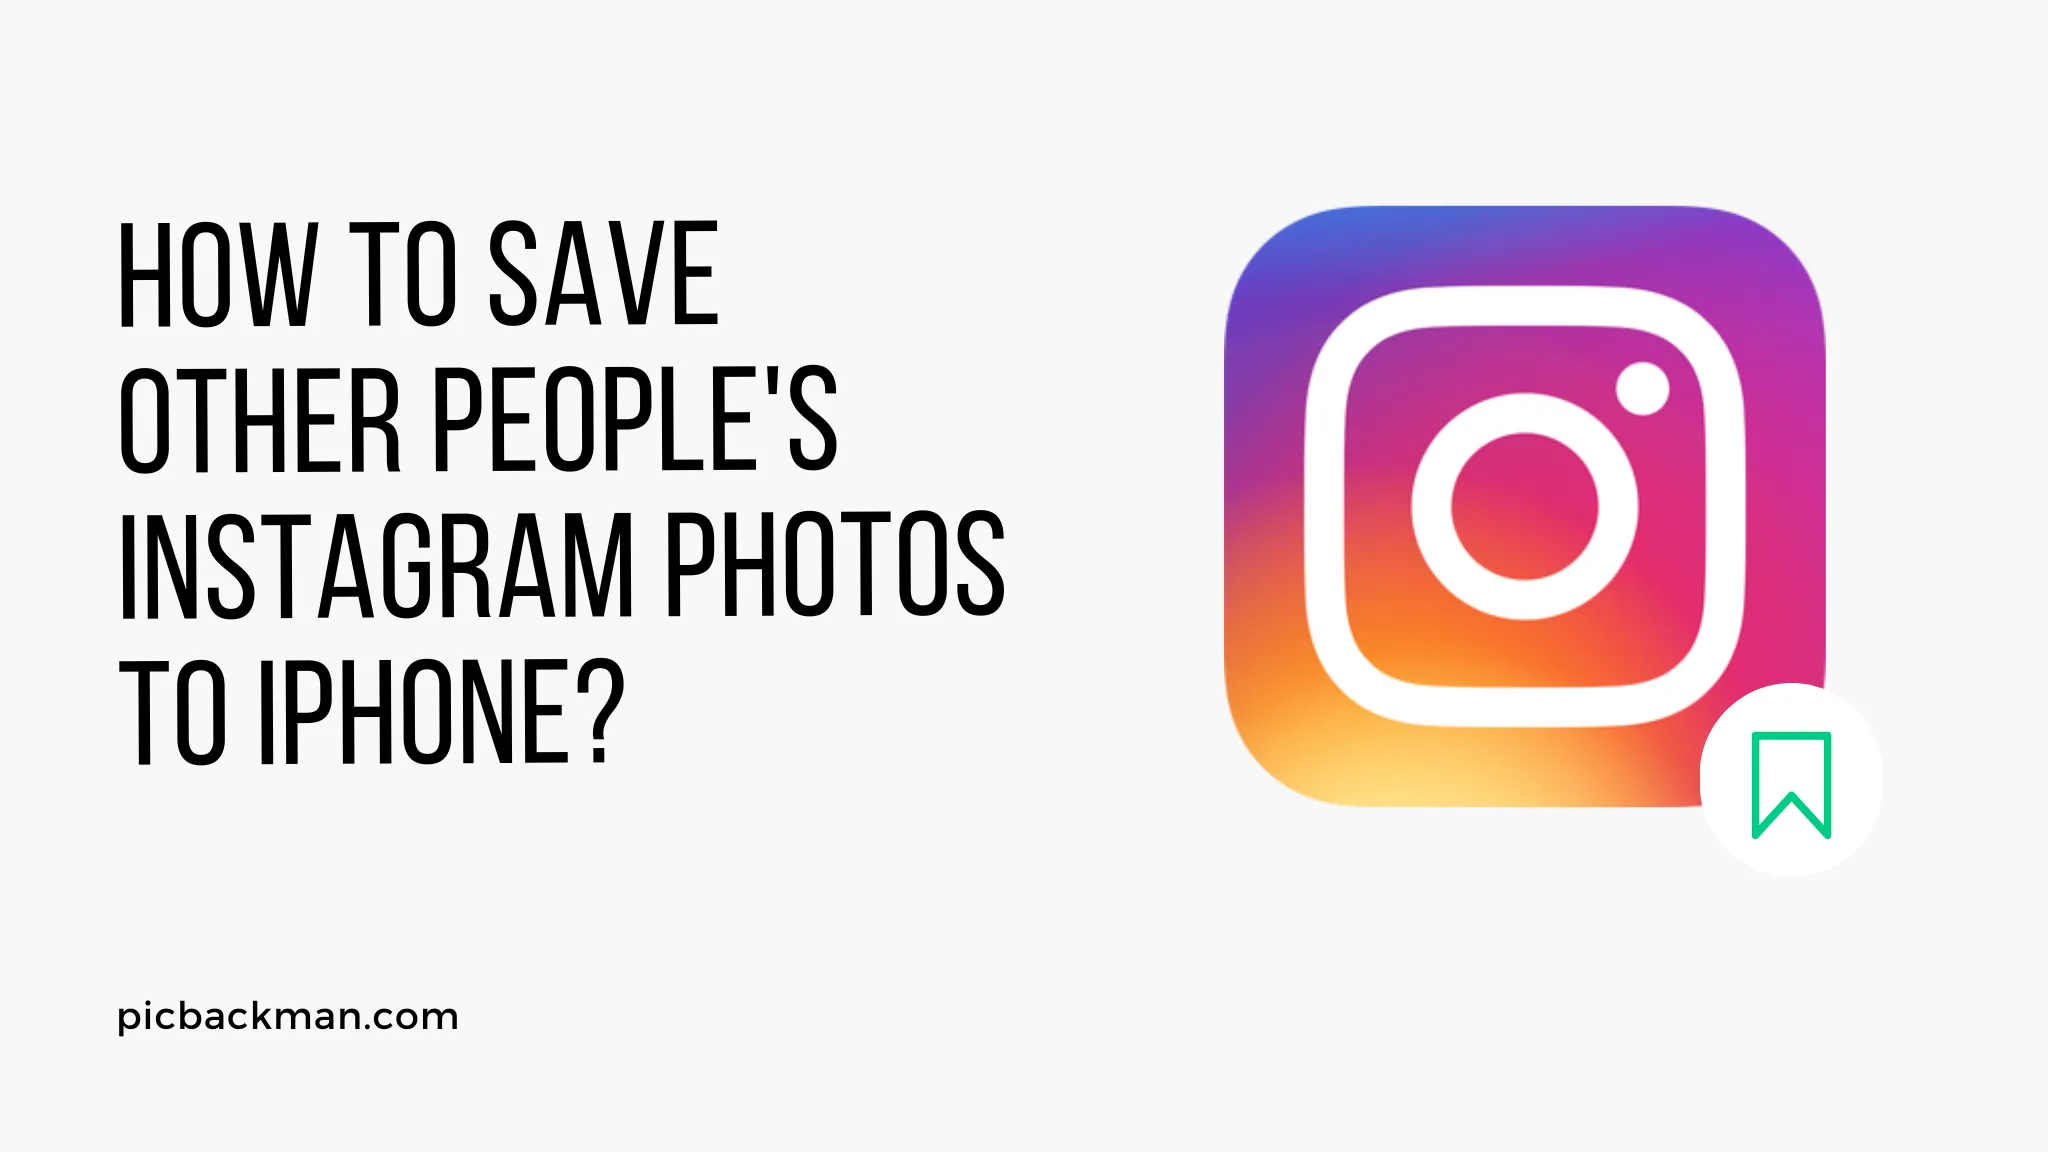 How to Save Other People's Instagram Photos to iPhone